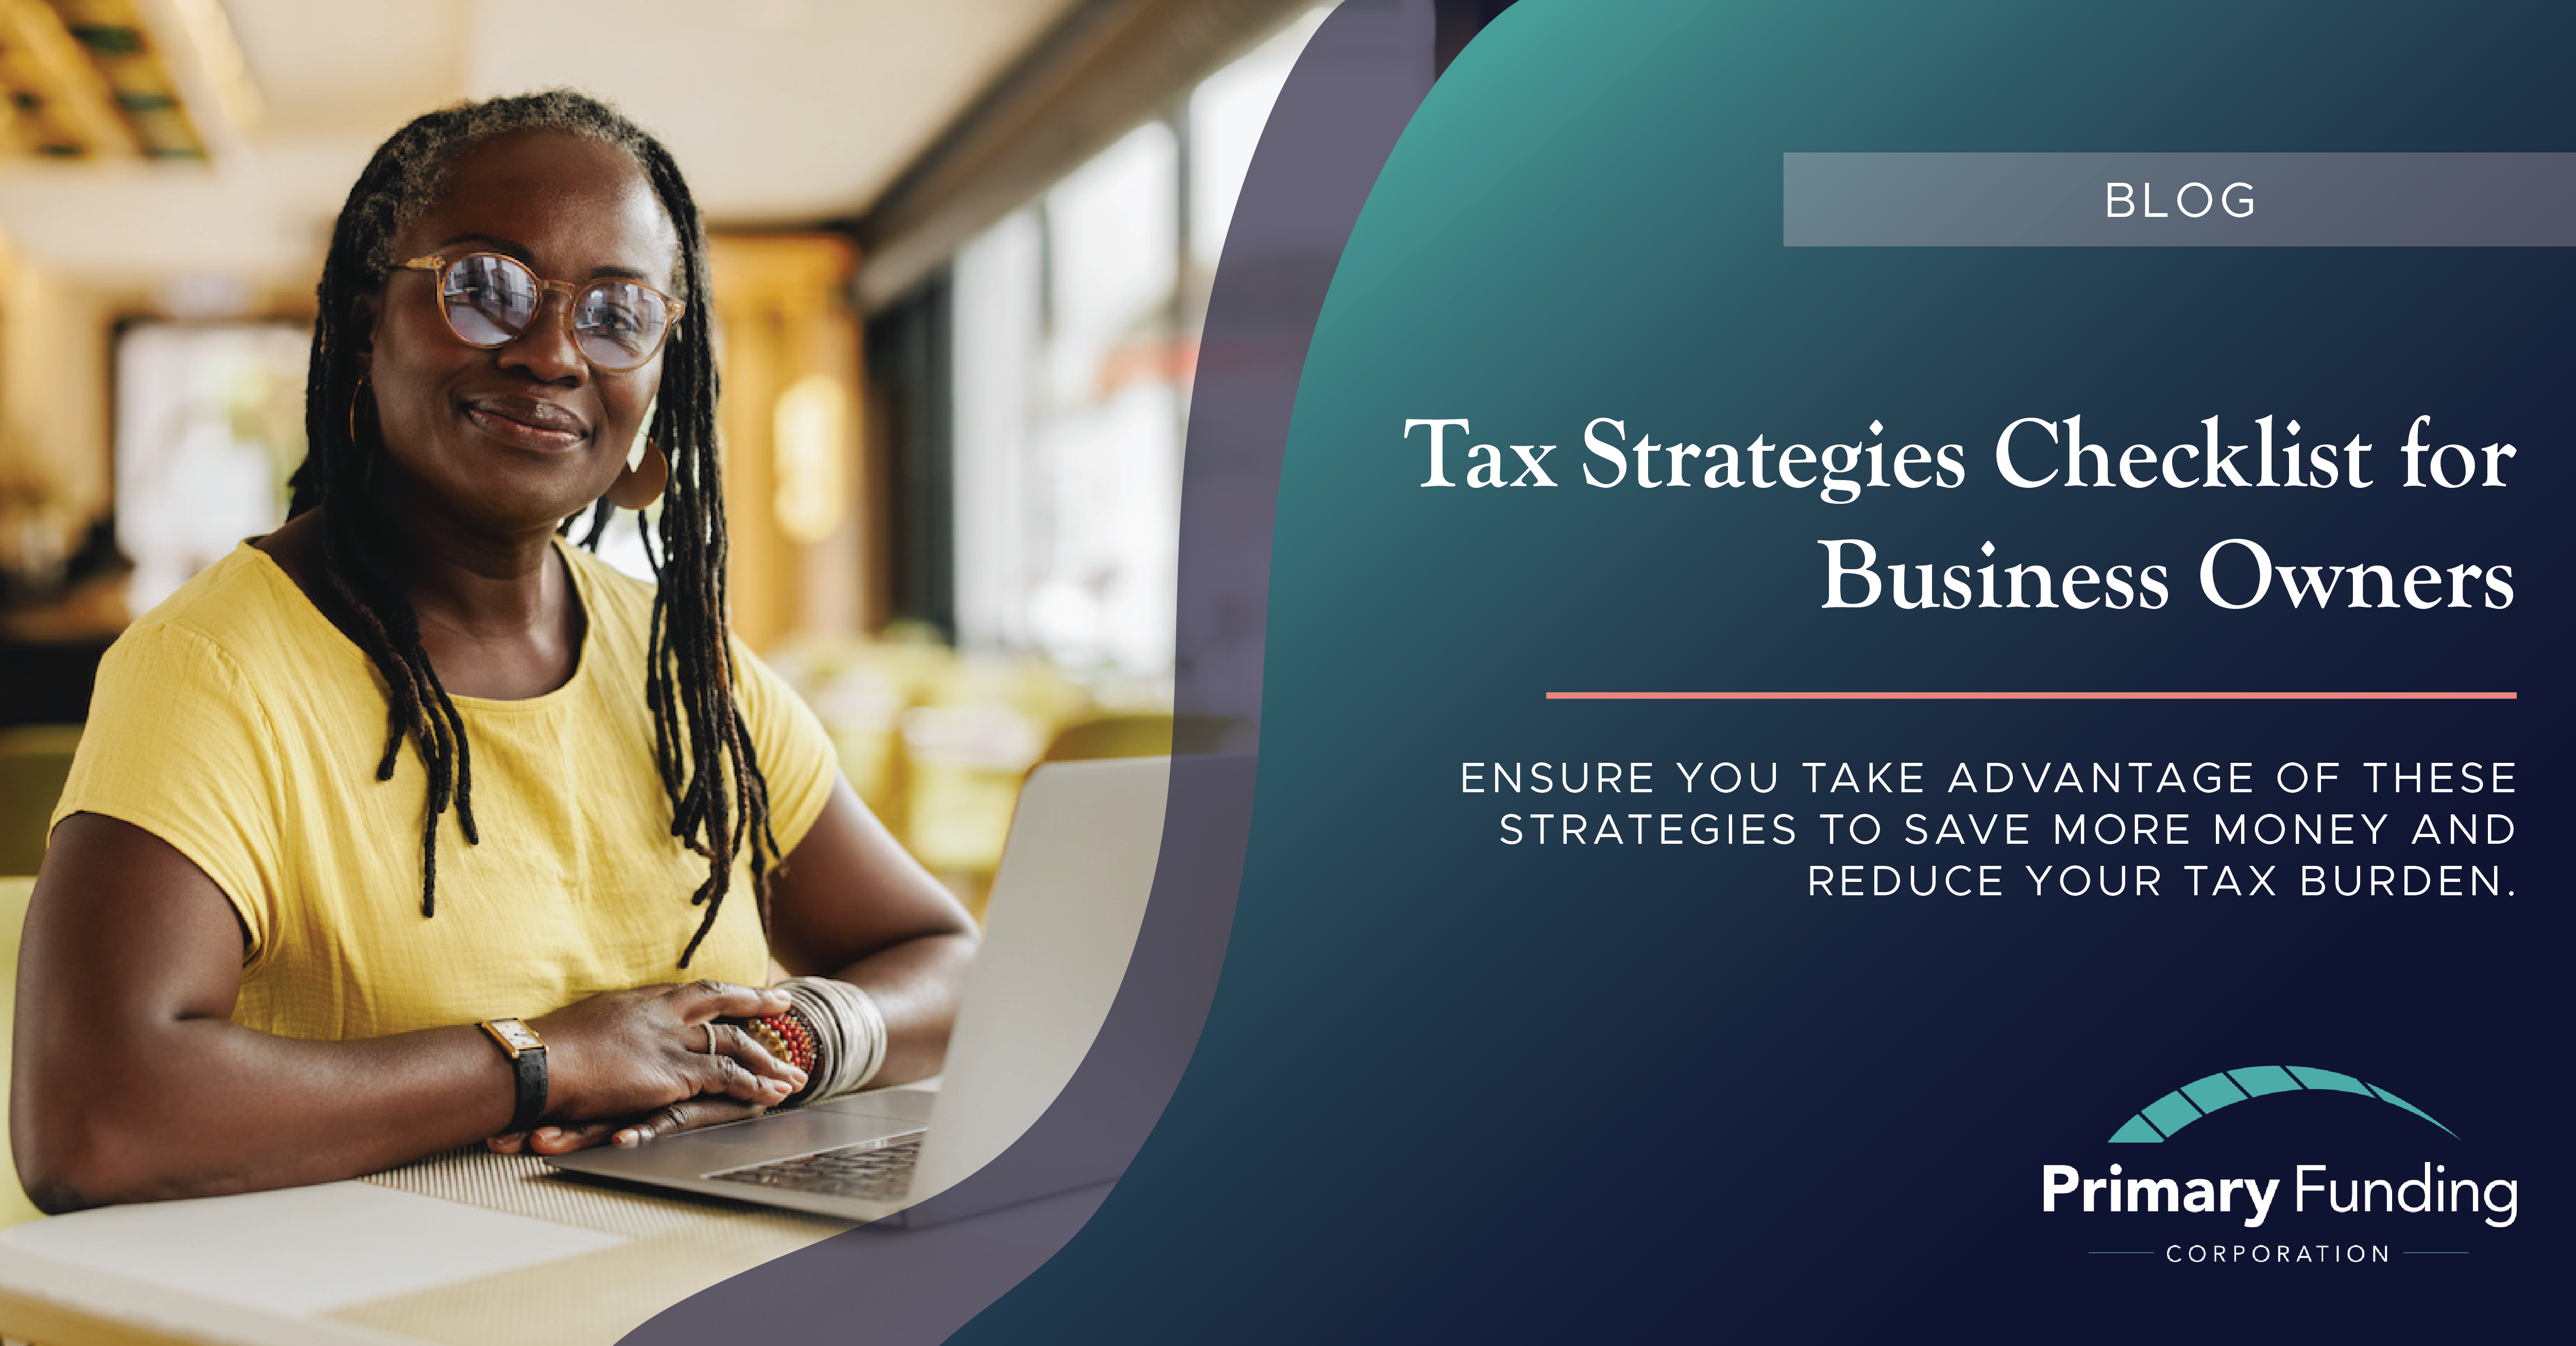 Tax Strategies Checklist for Business Owners